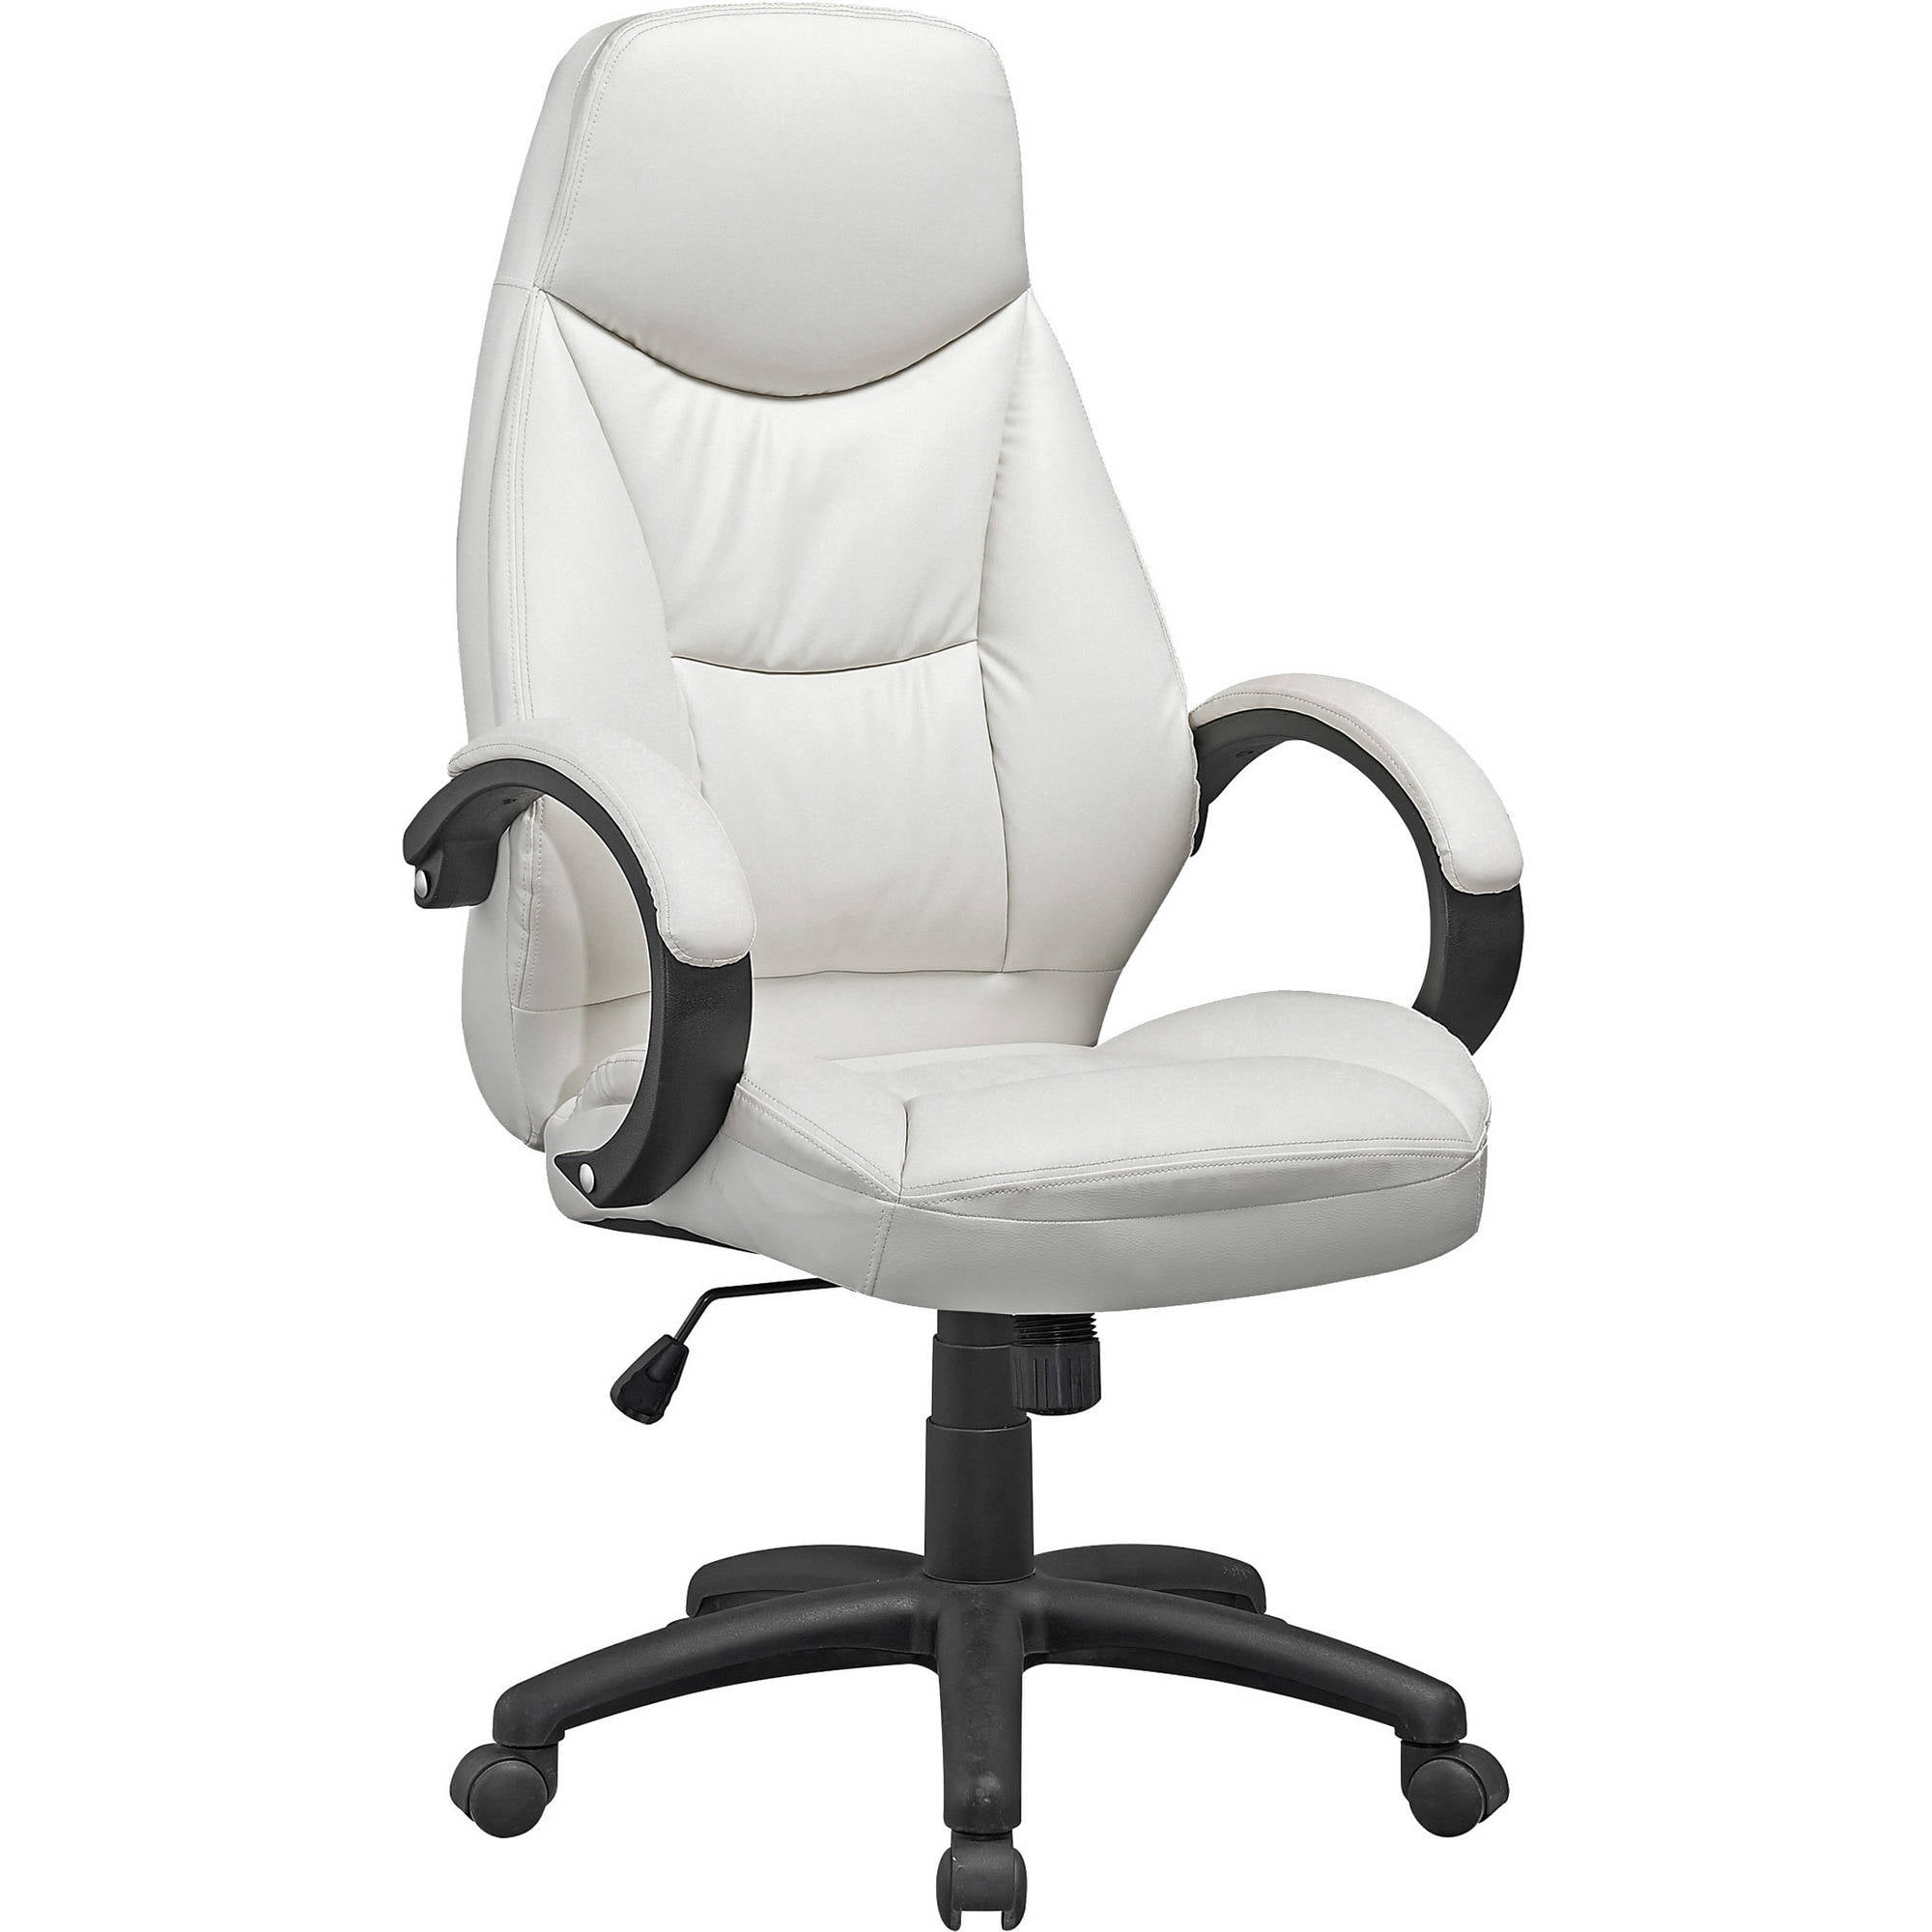 Workspace Executive Office Chair in White Leatherette - Walmart.com